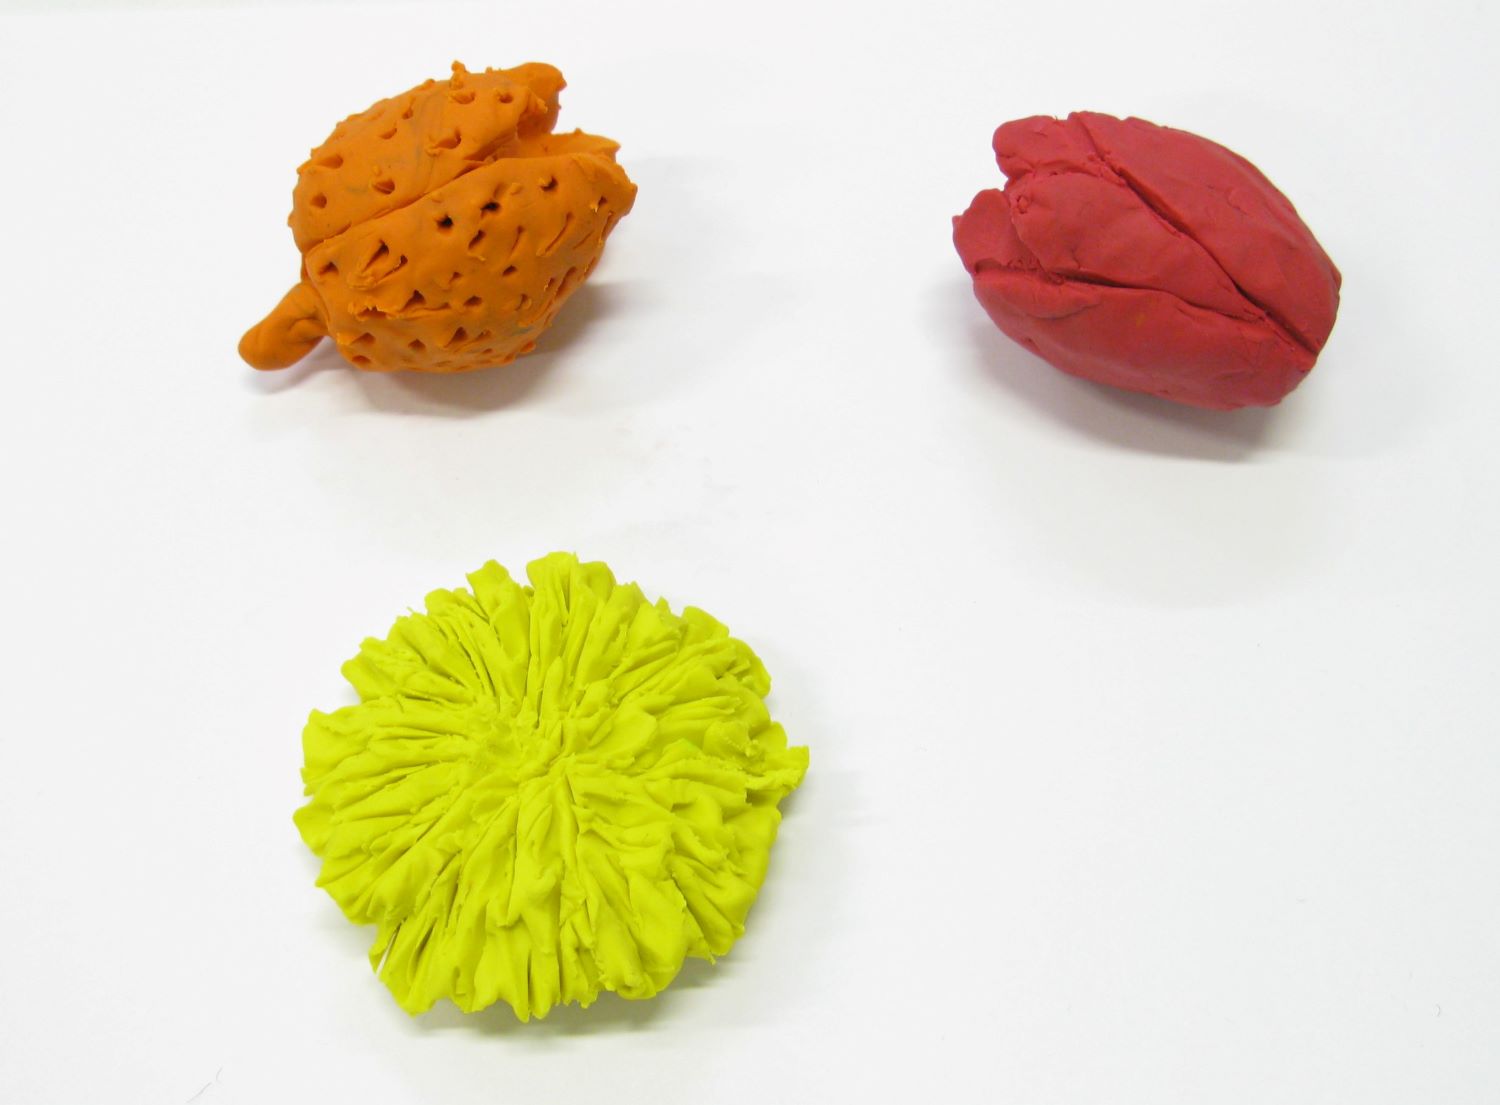 Flower head and seed sculptures made from plasticine